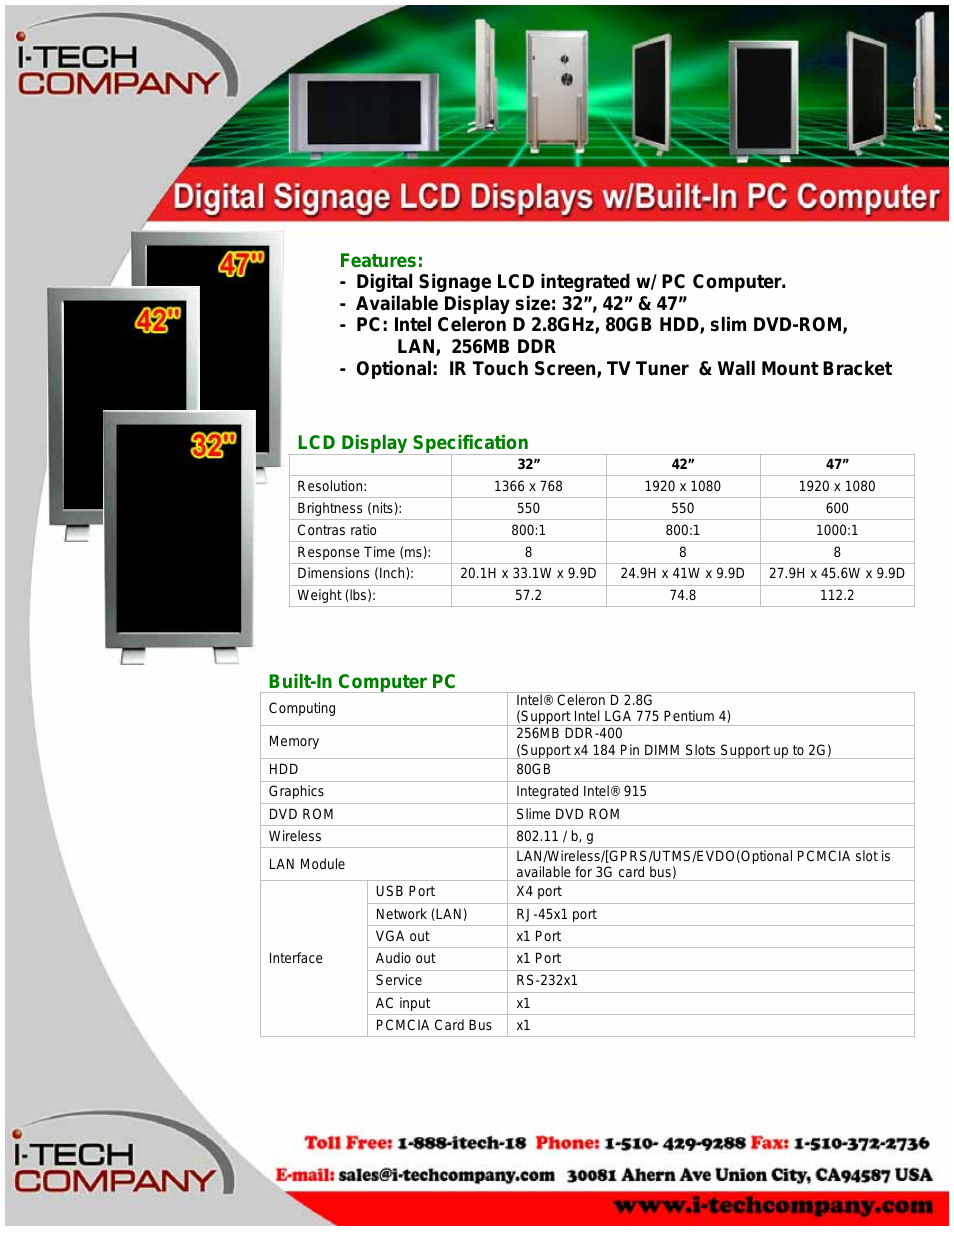 Digital Signage LCD integrated w/ PC Computer